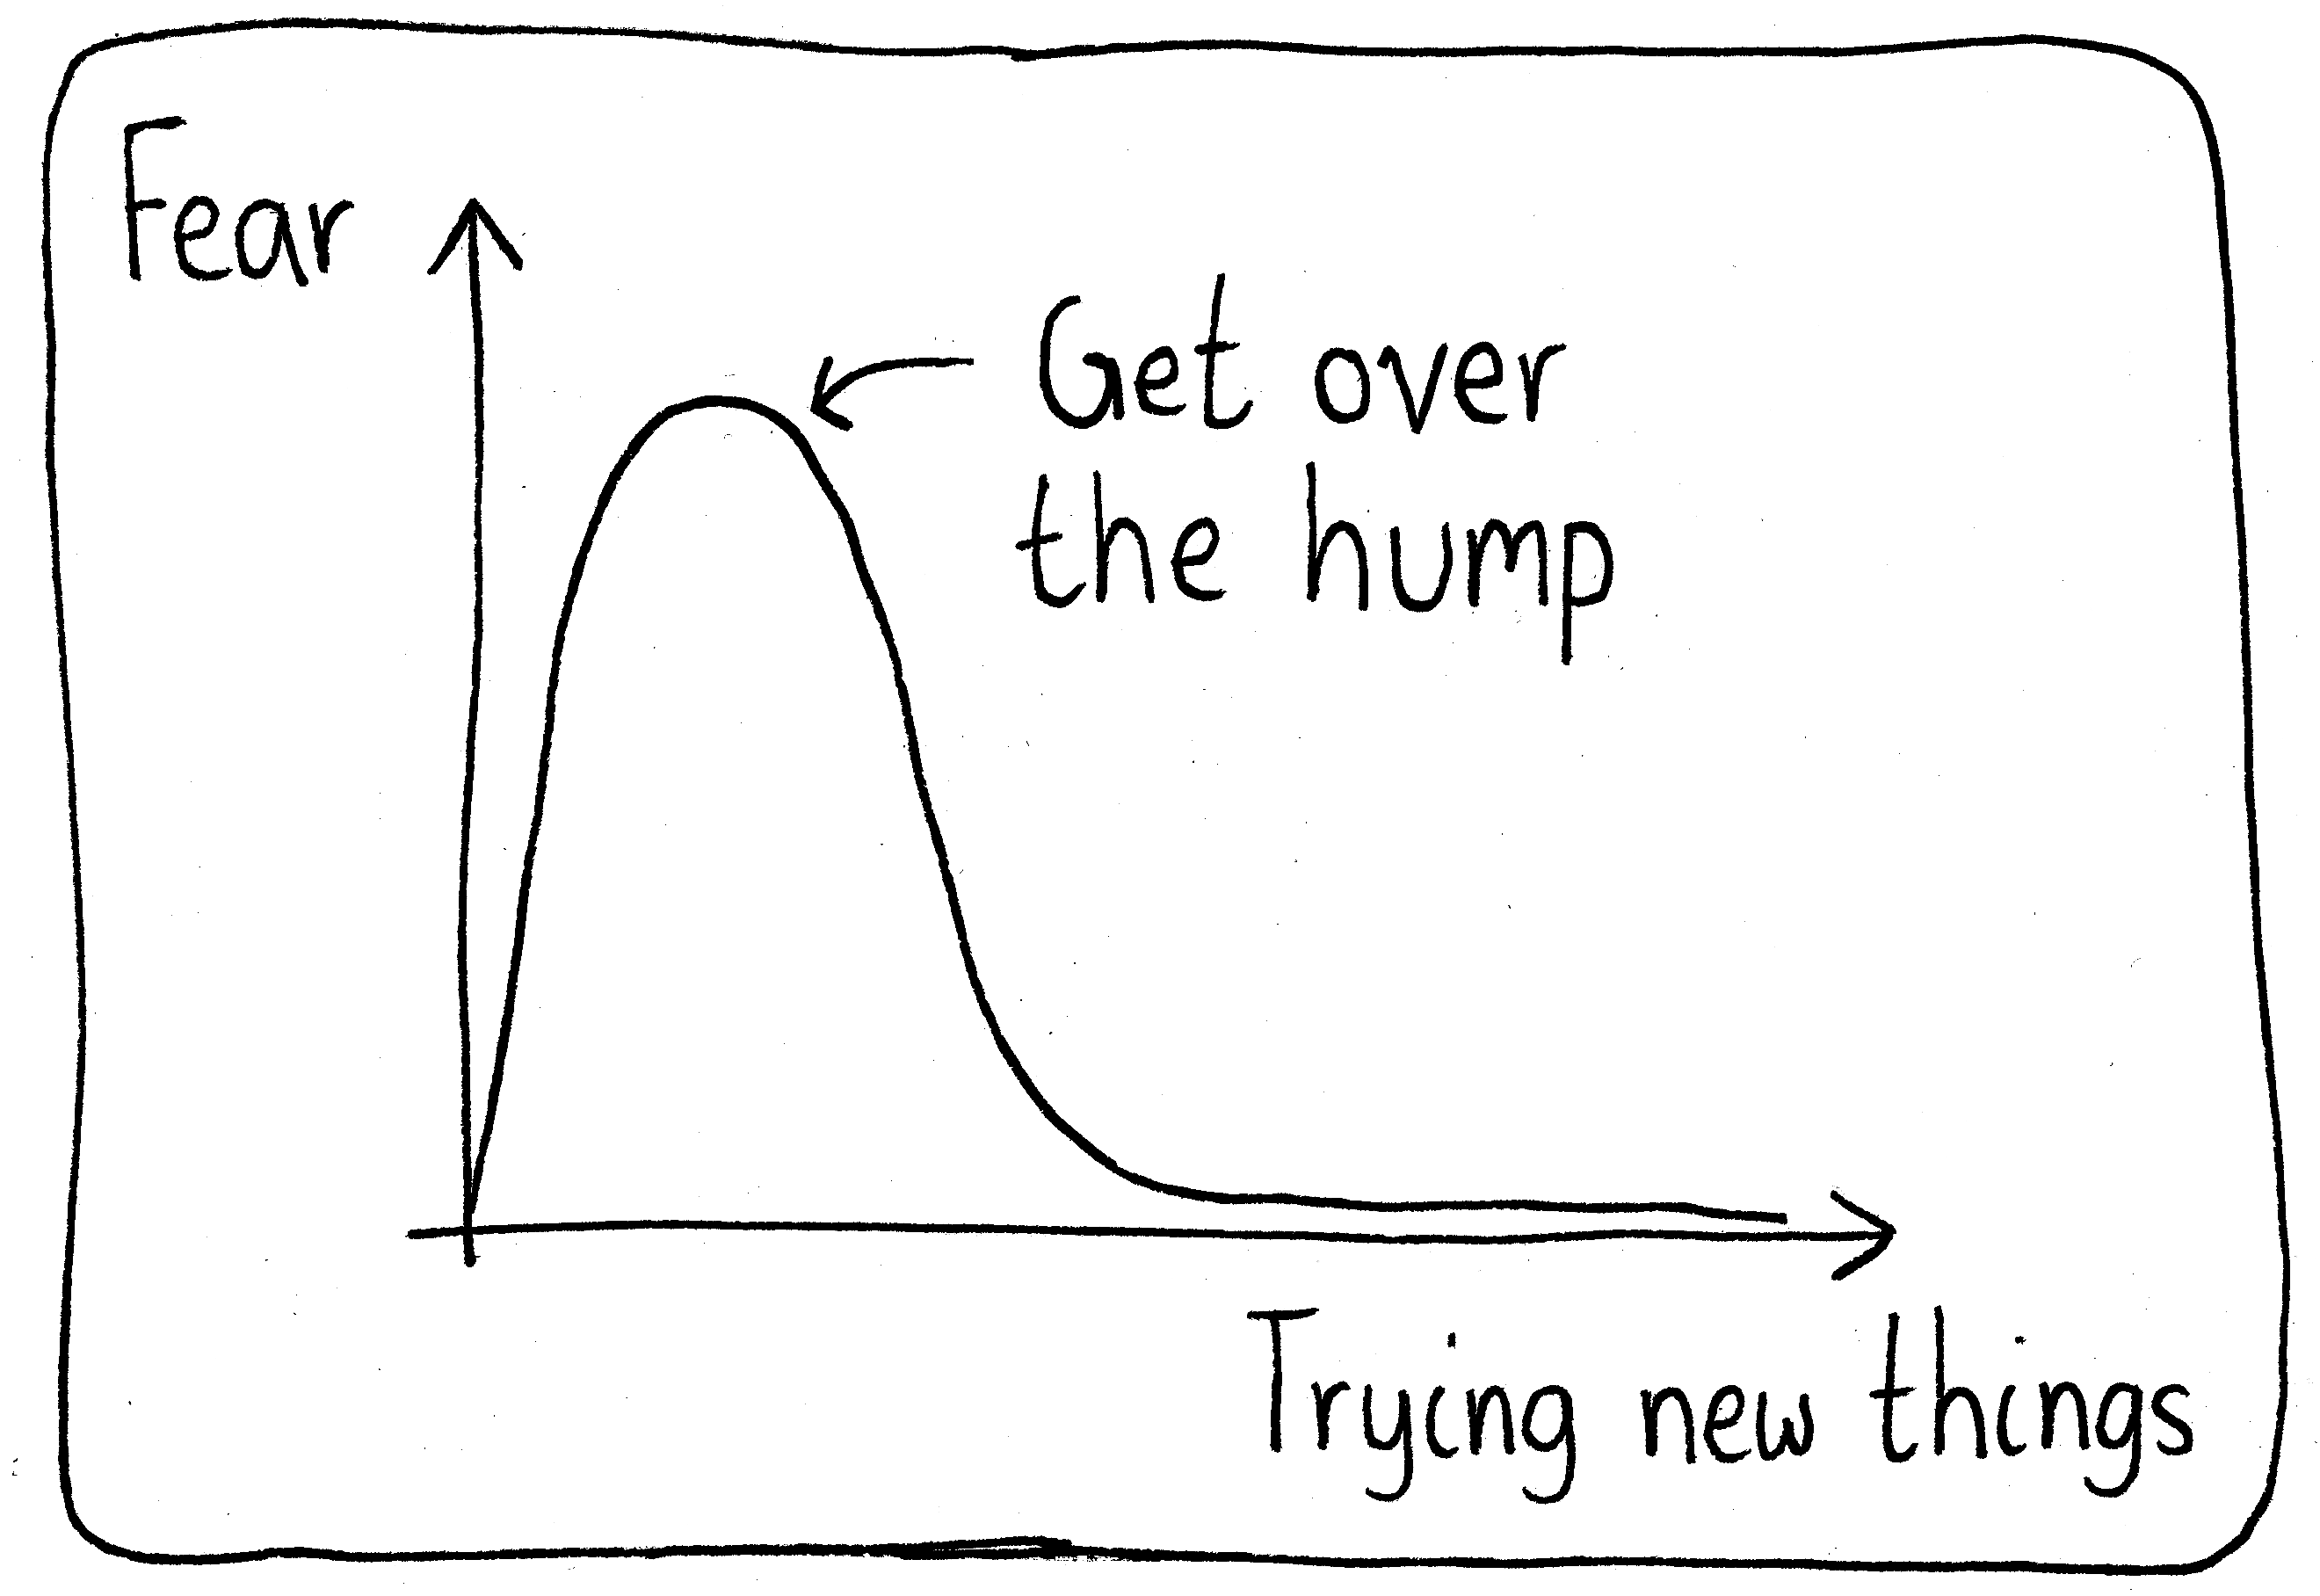 A graph of "Fear" versus "Trying new things". There's an initial hump, and then the fear diminishes. At the peak, there's a label, "Get over the hump".